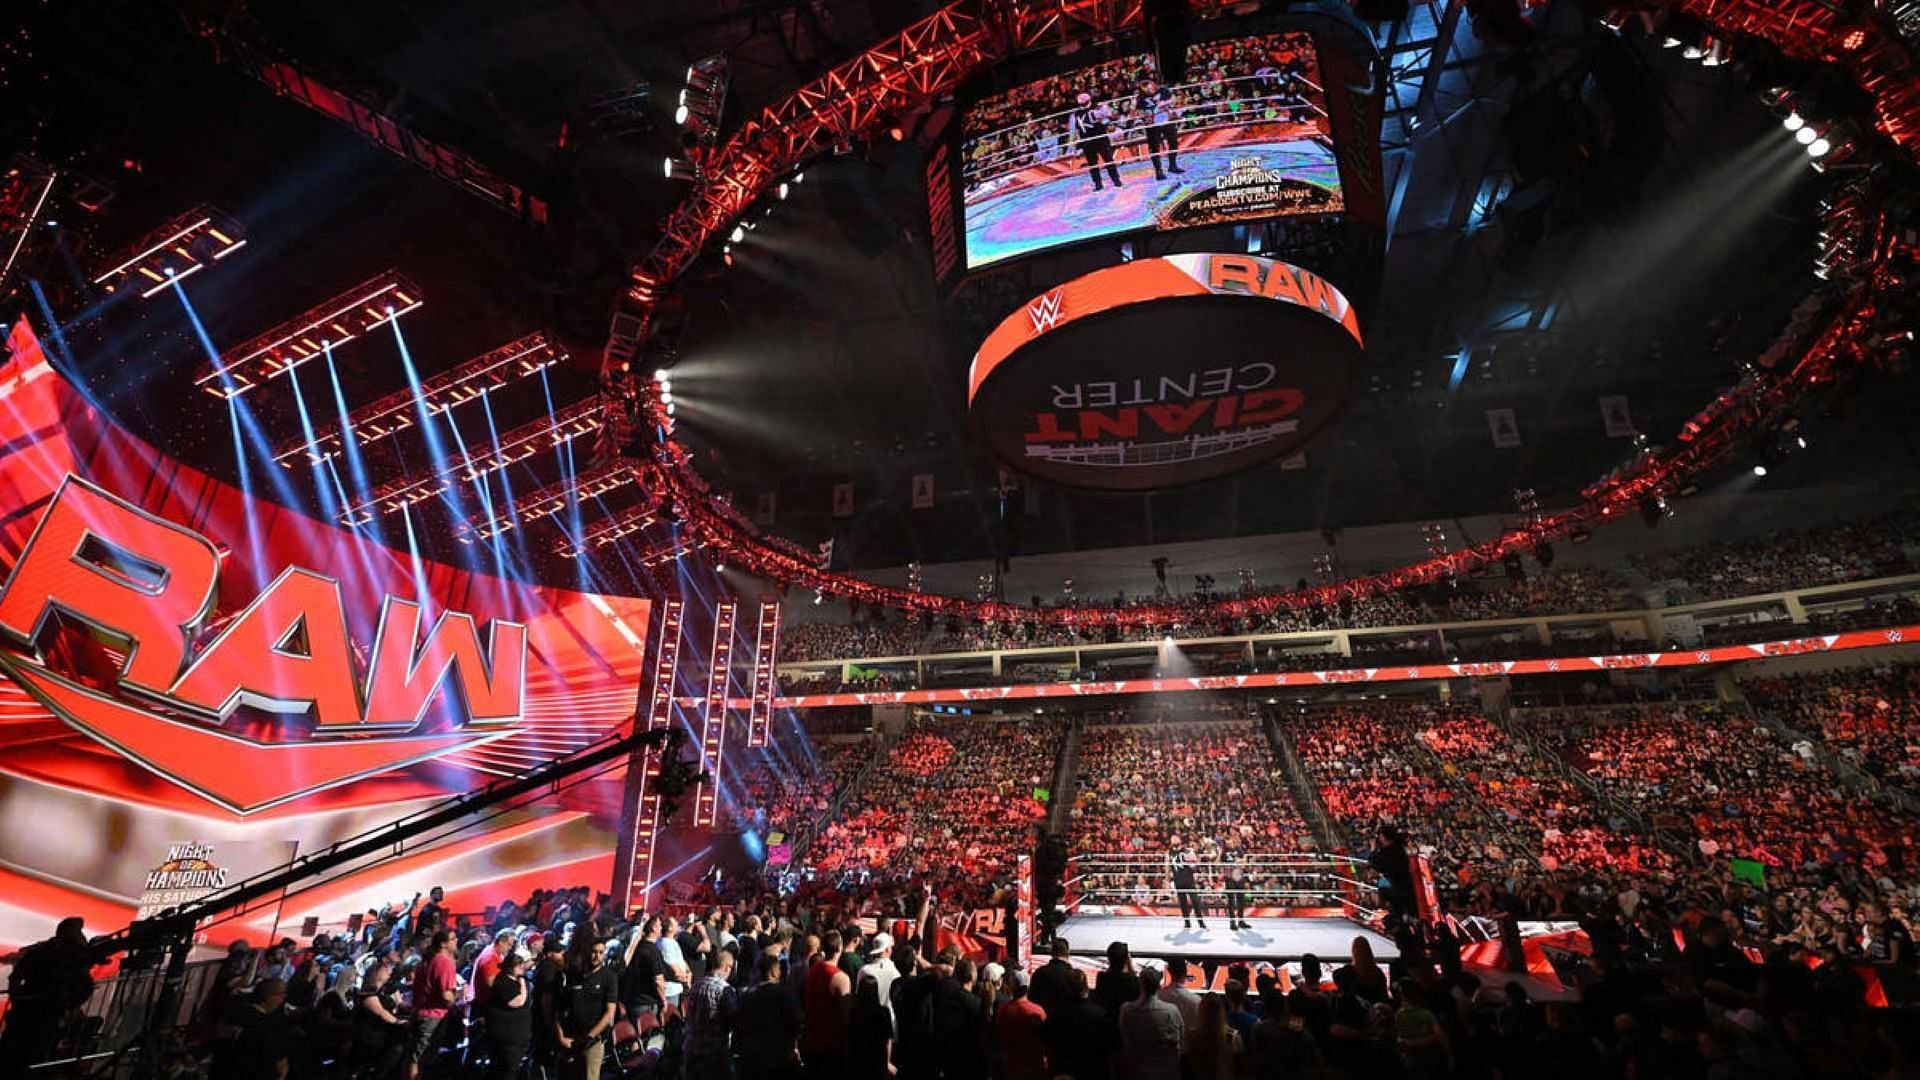 The WWE RAW ring and stage/set on display inside arena